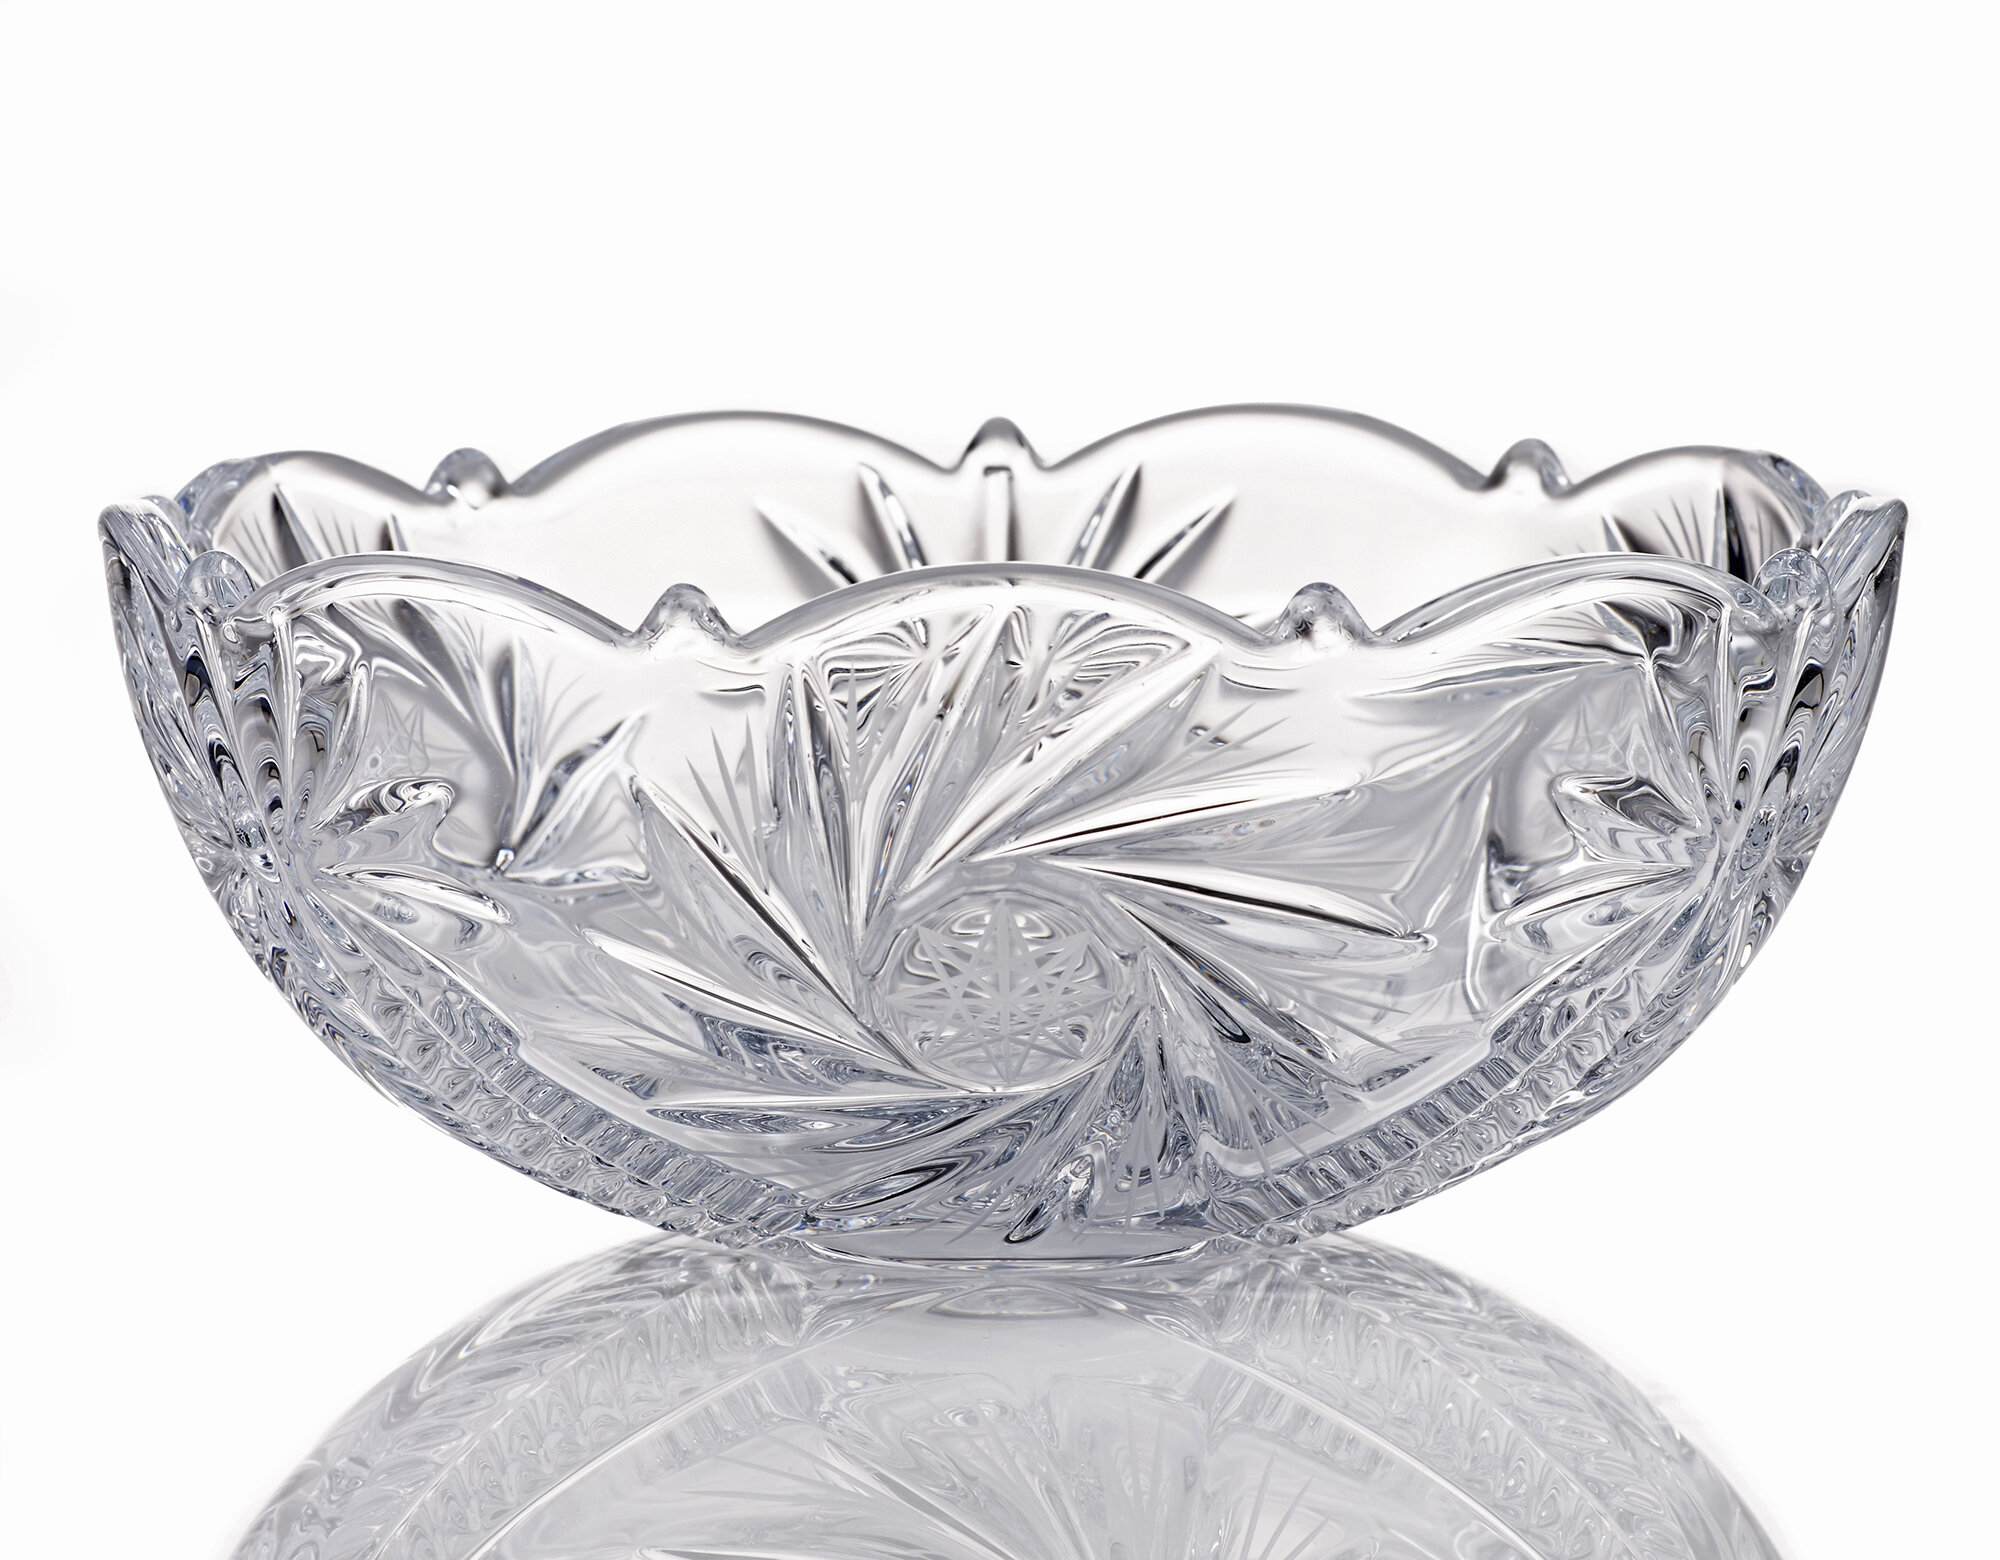 GREAT GIFT  DECORATIVE BOWLS 